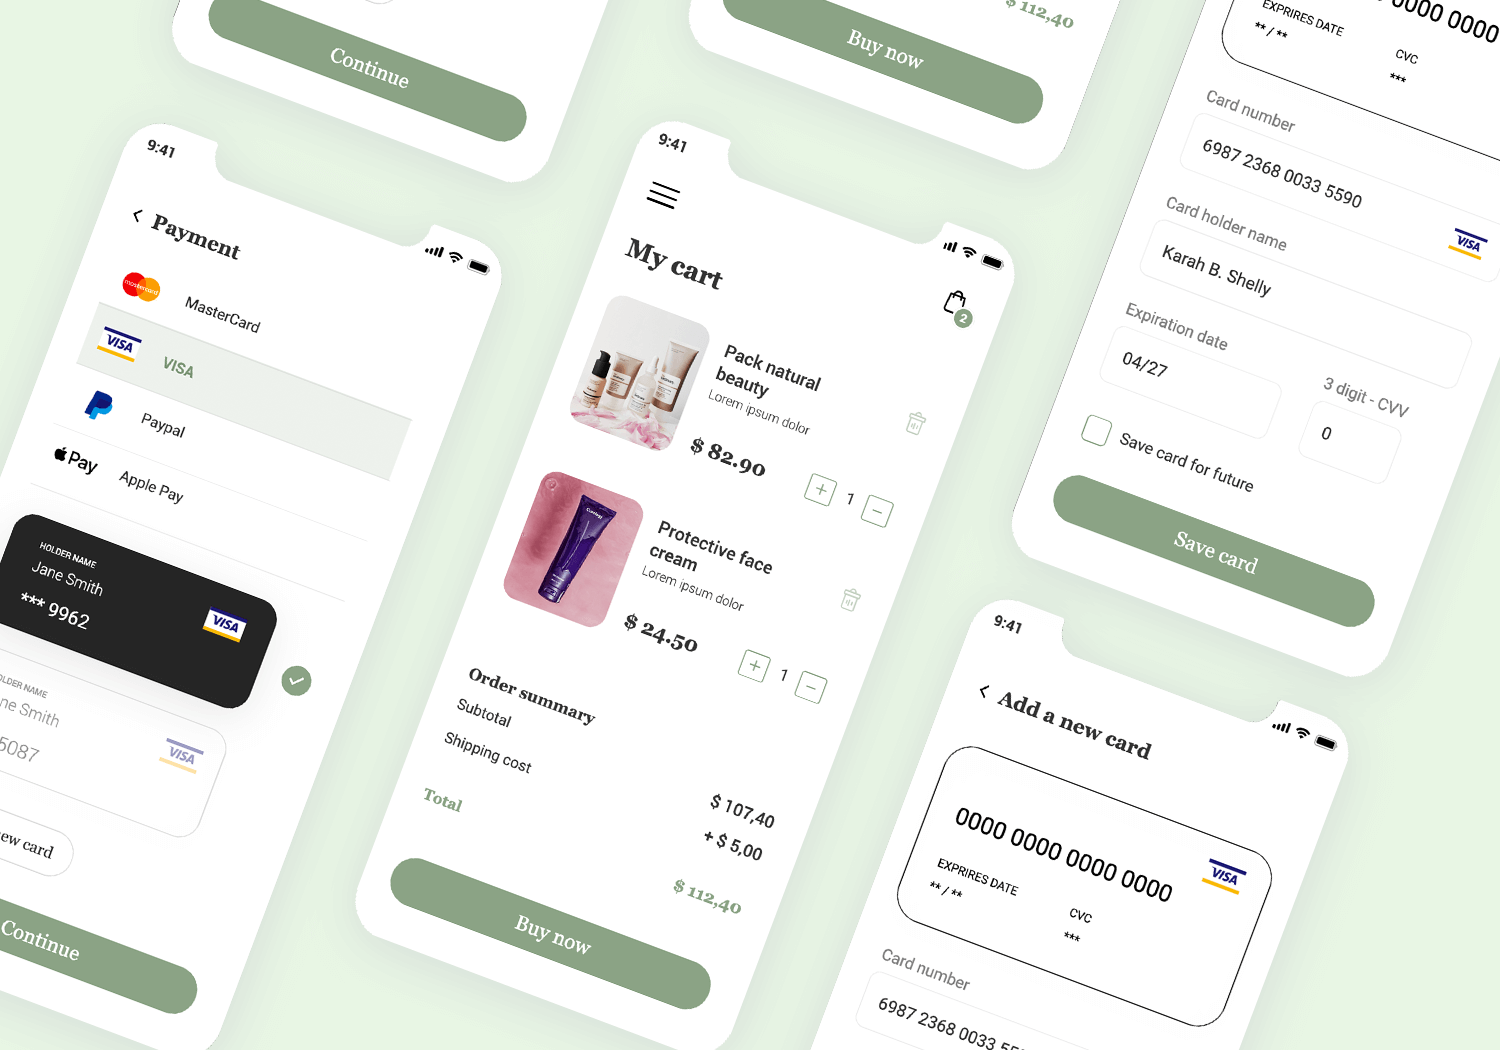 E-commerce app mockup displaying payment options, shopping cart, and card details entry.